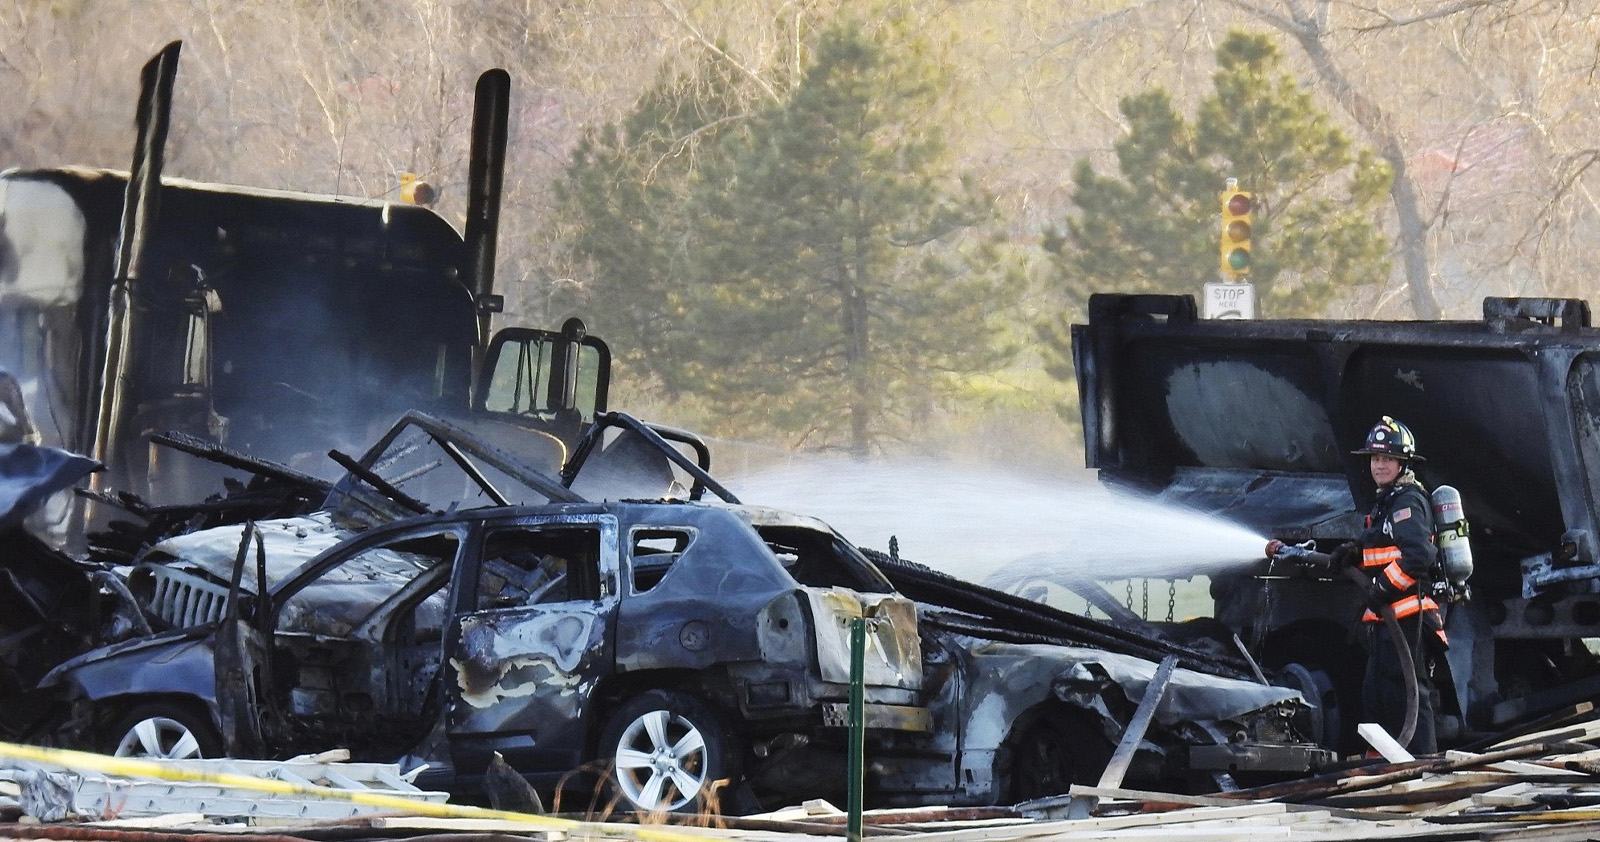 Firefighters putting out burning cars in fatal car crash